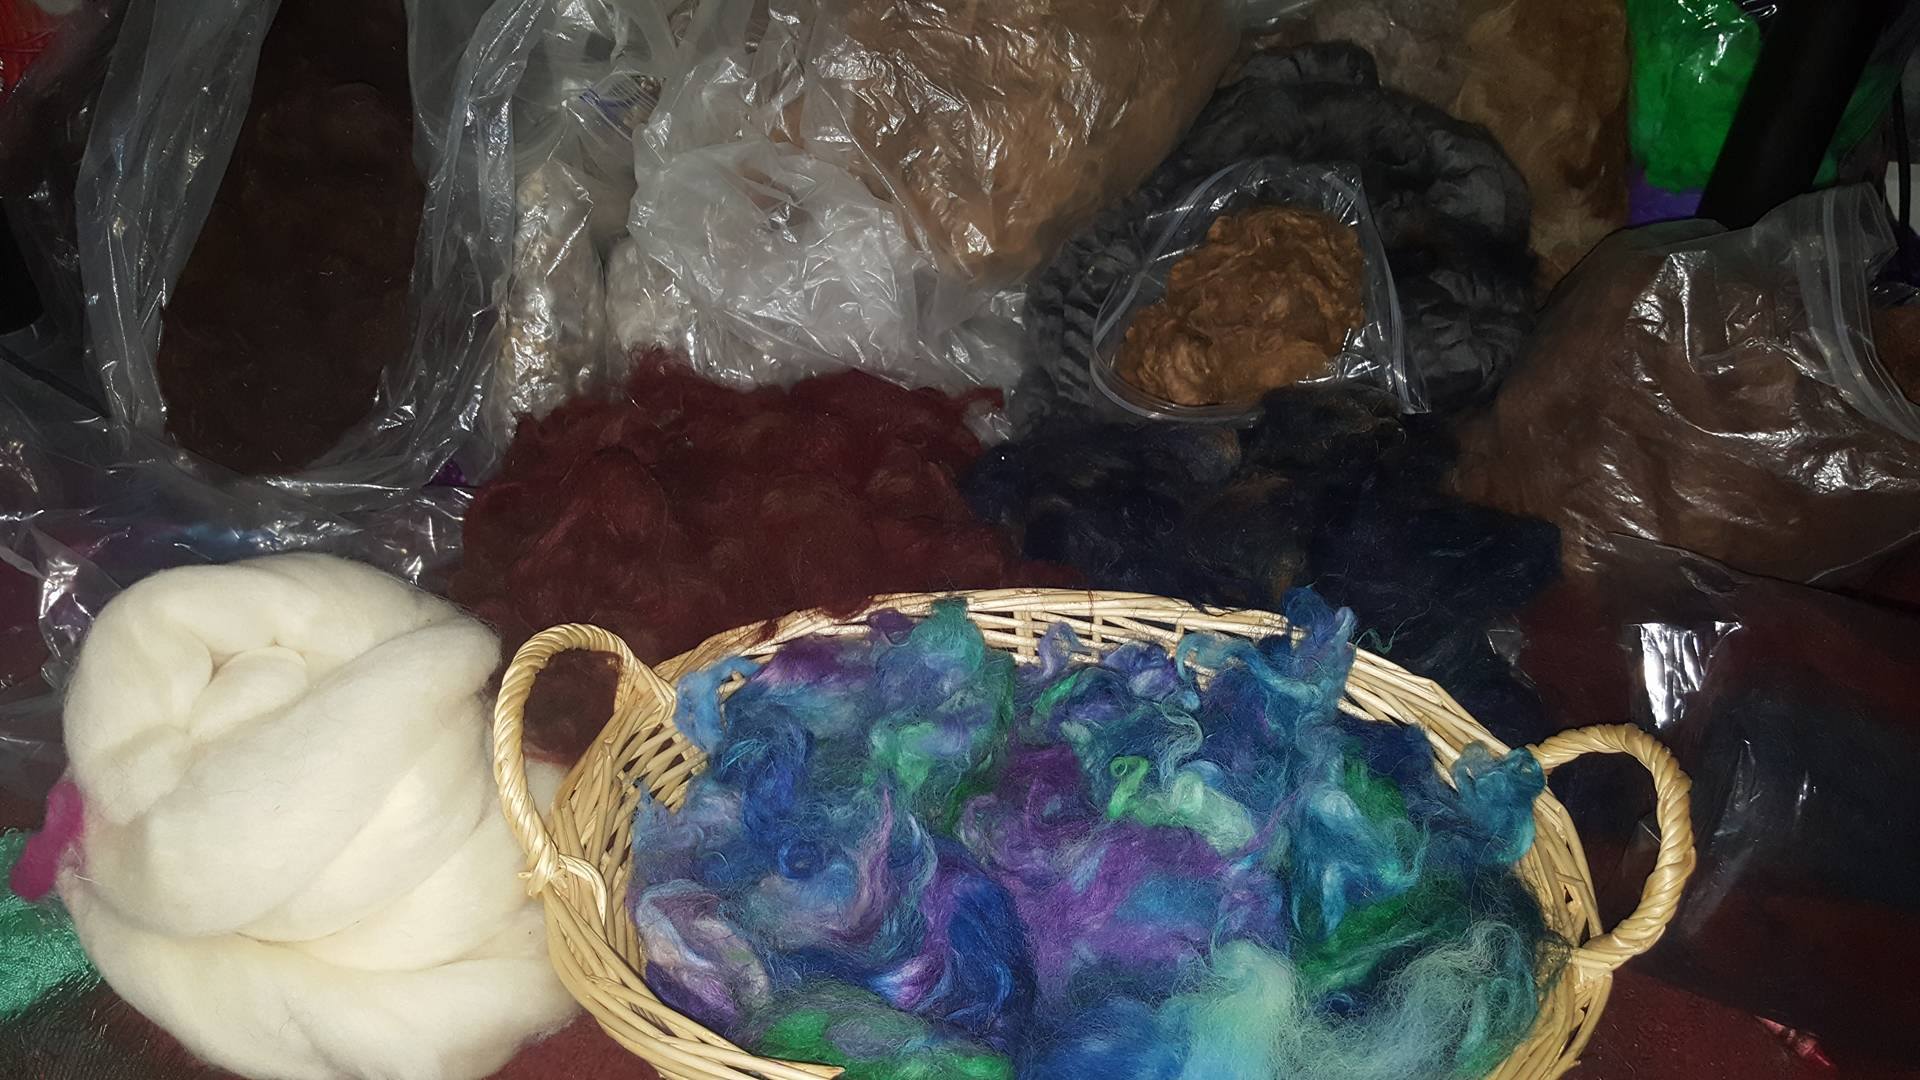 In the basket is some alpaca fiber I kettle dyed